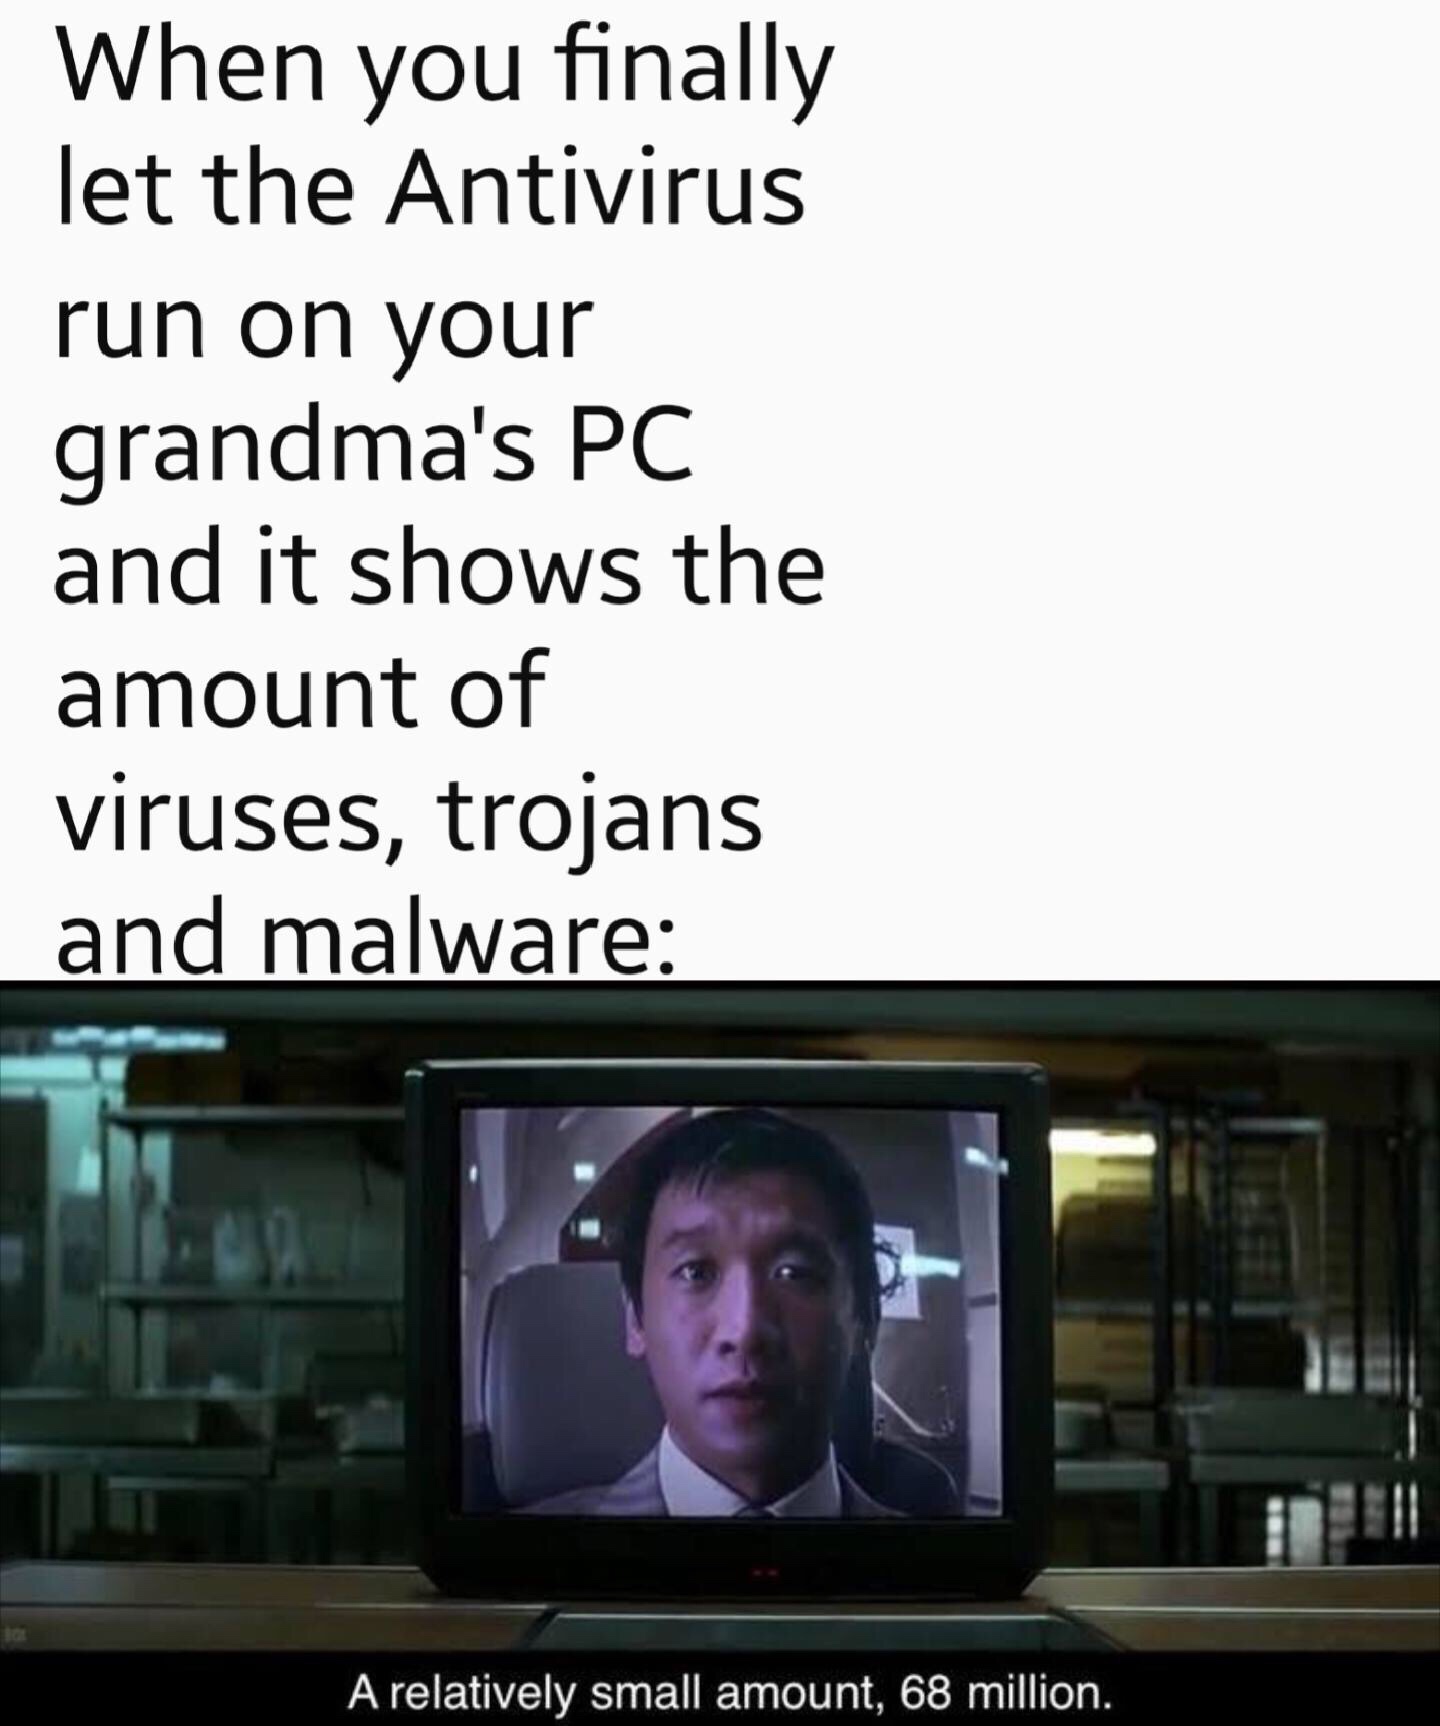 memes - presentation - When you finally let the Antivirus run on your grandma's Pc and it shows the amount of viruses, trojans and malware A relatively small amount, 68 million.